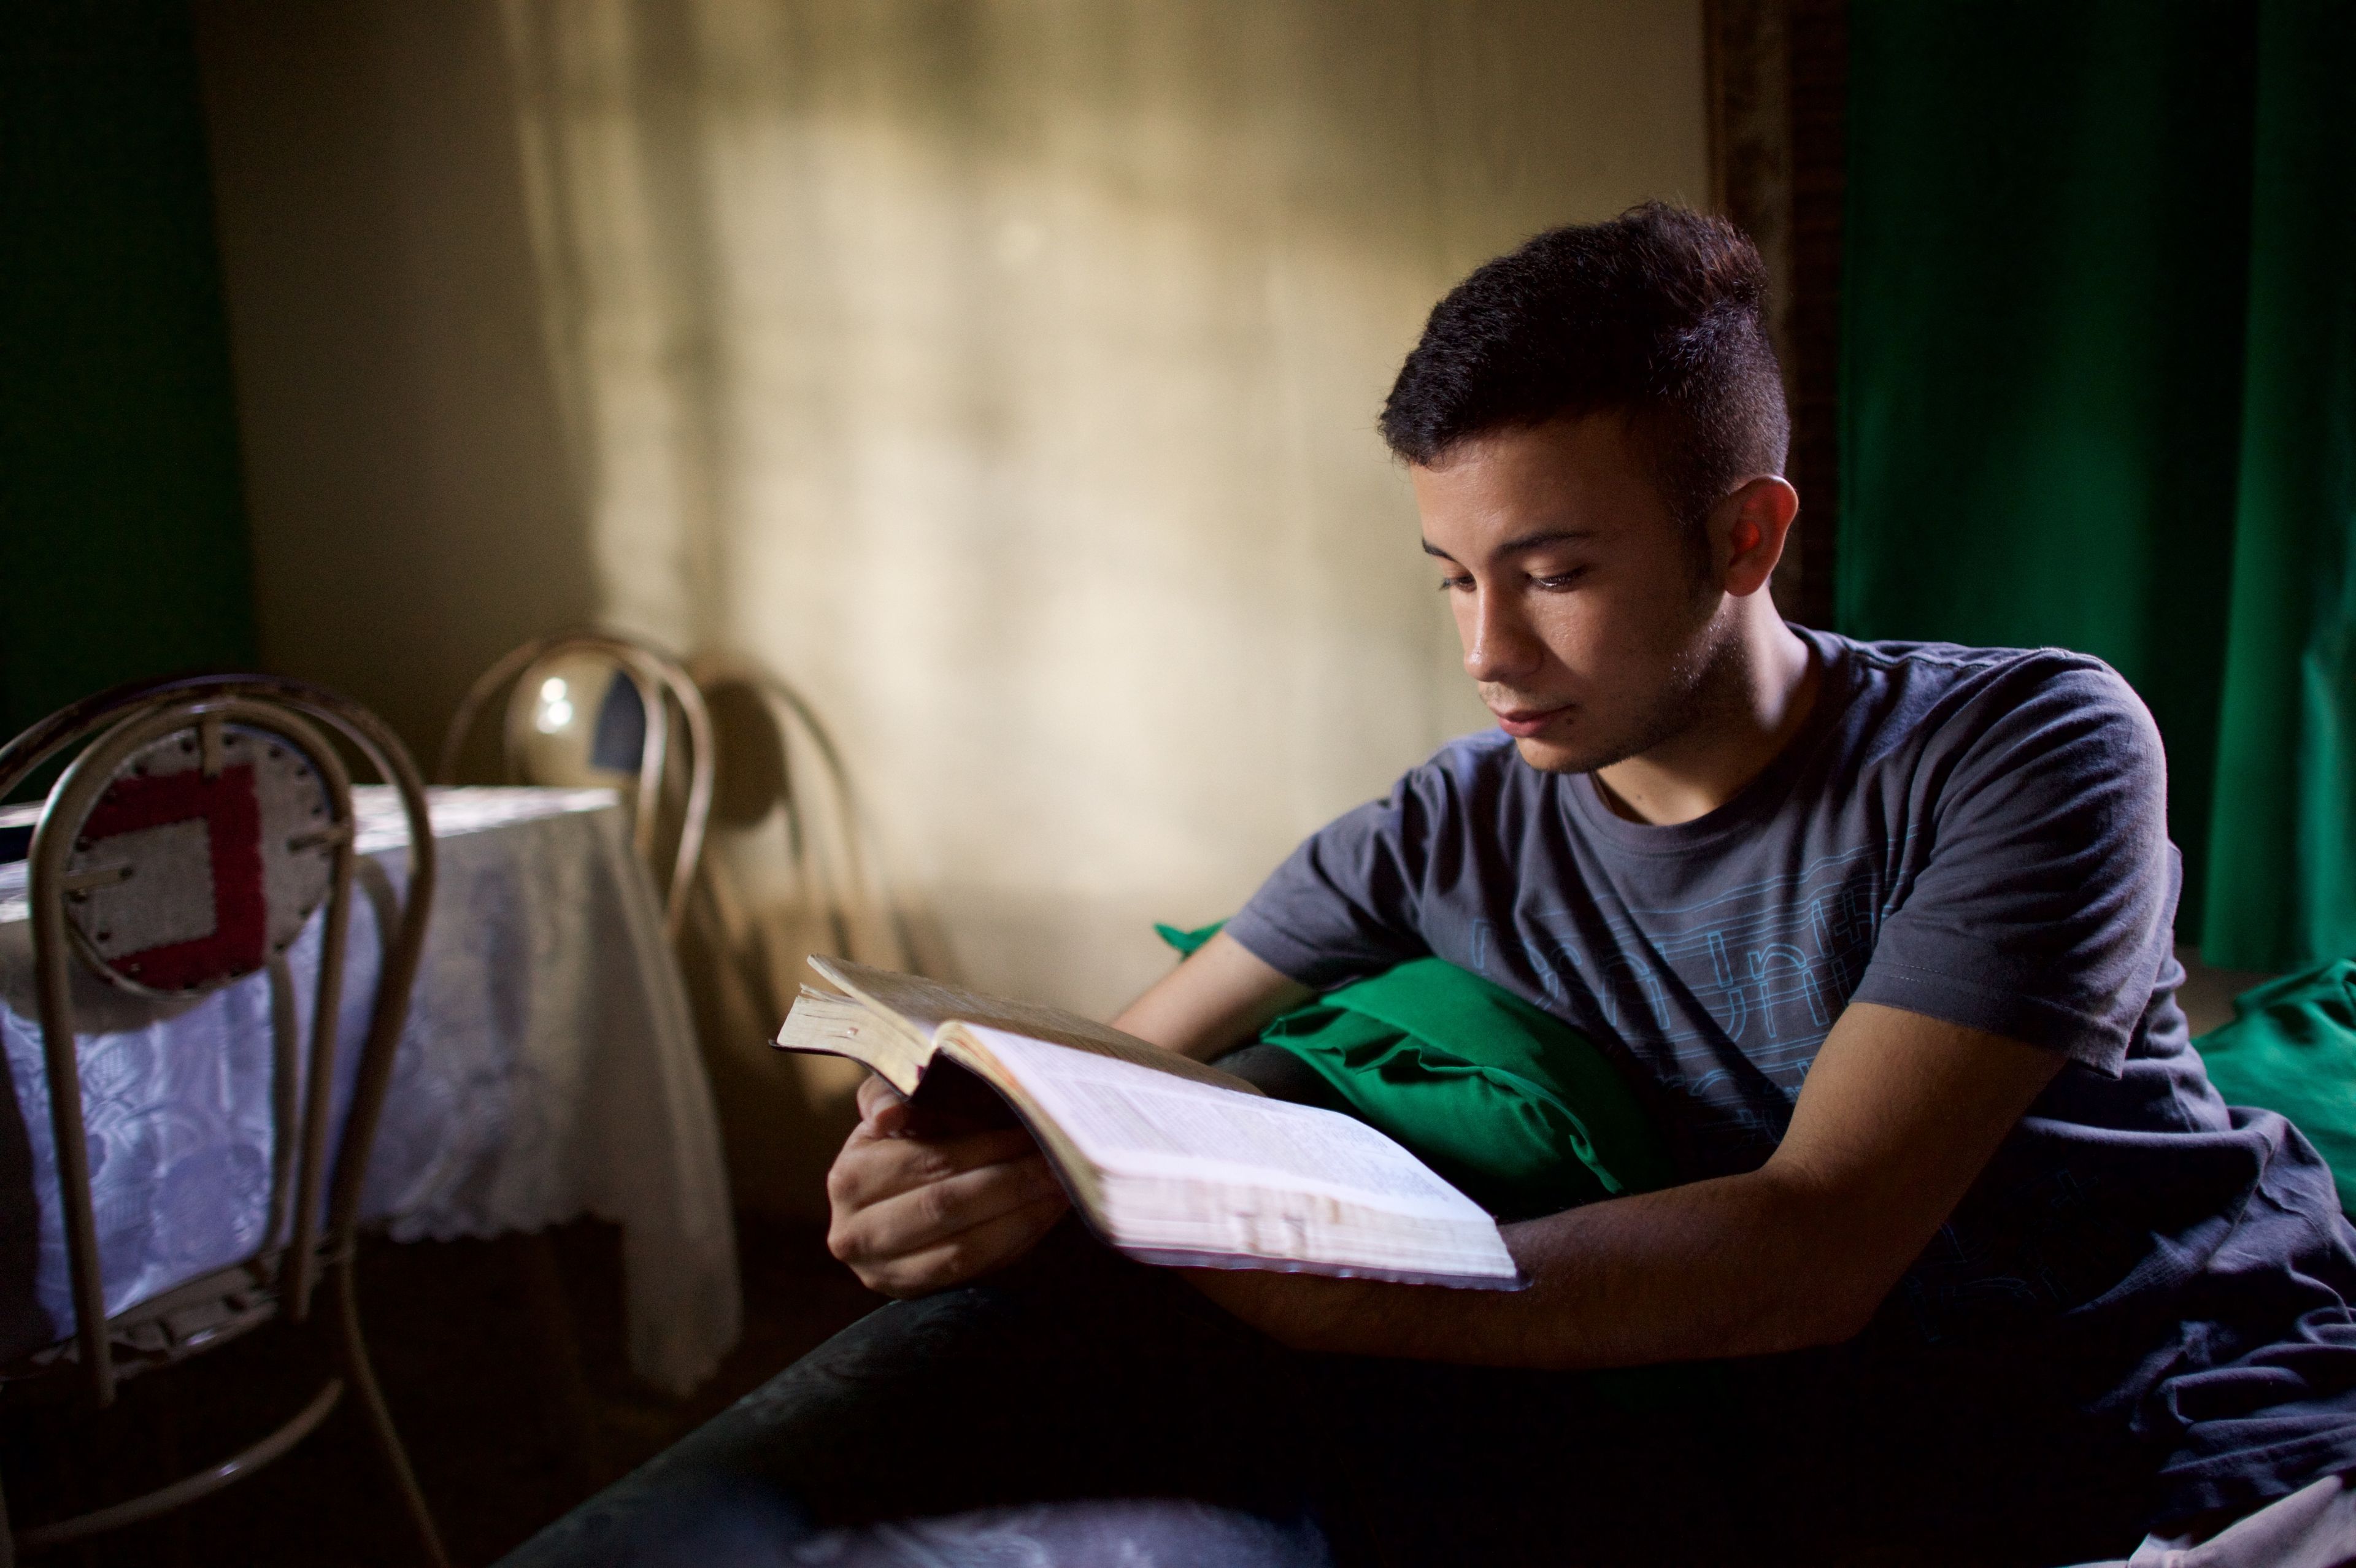 A young man studying scriptures.